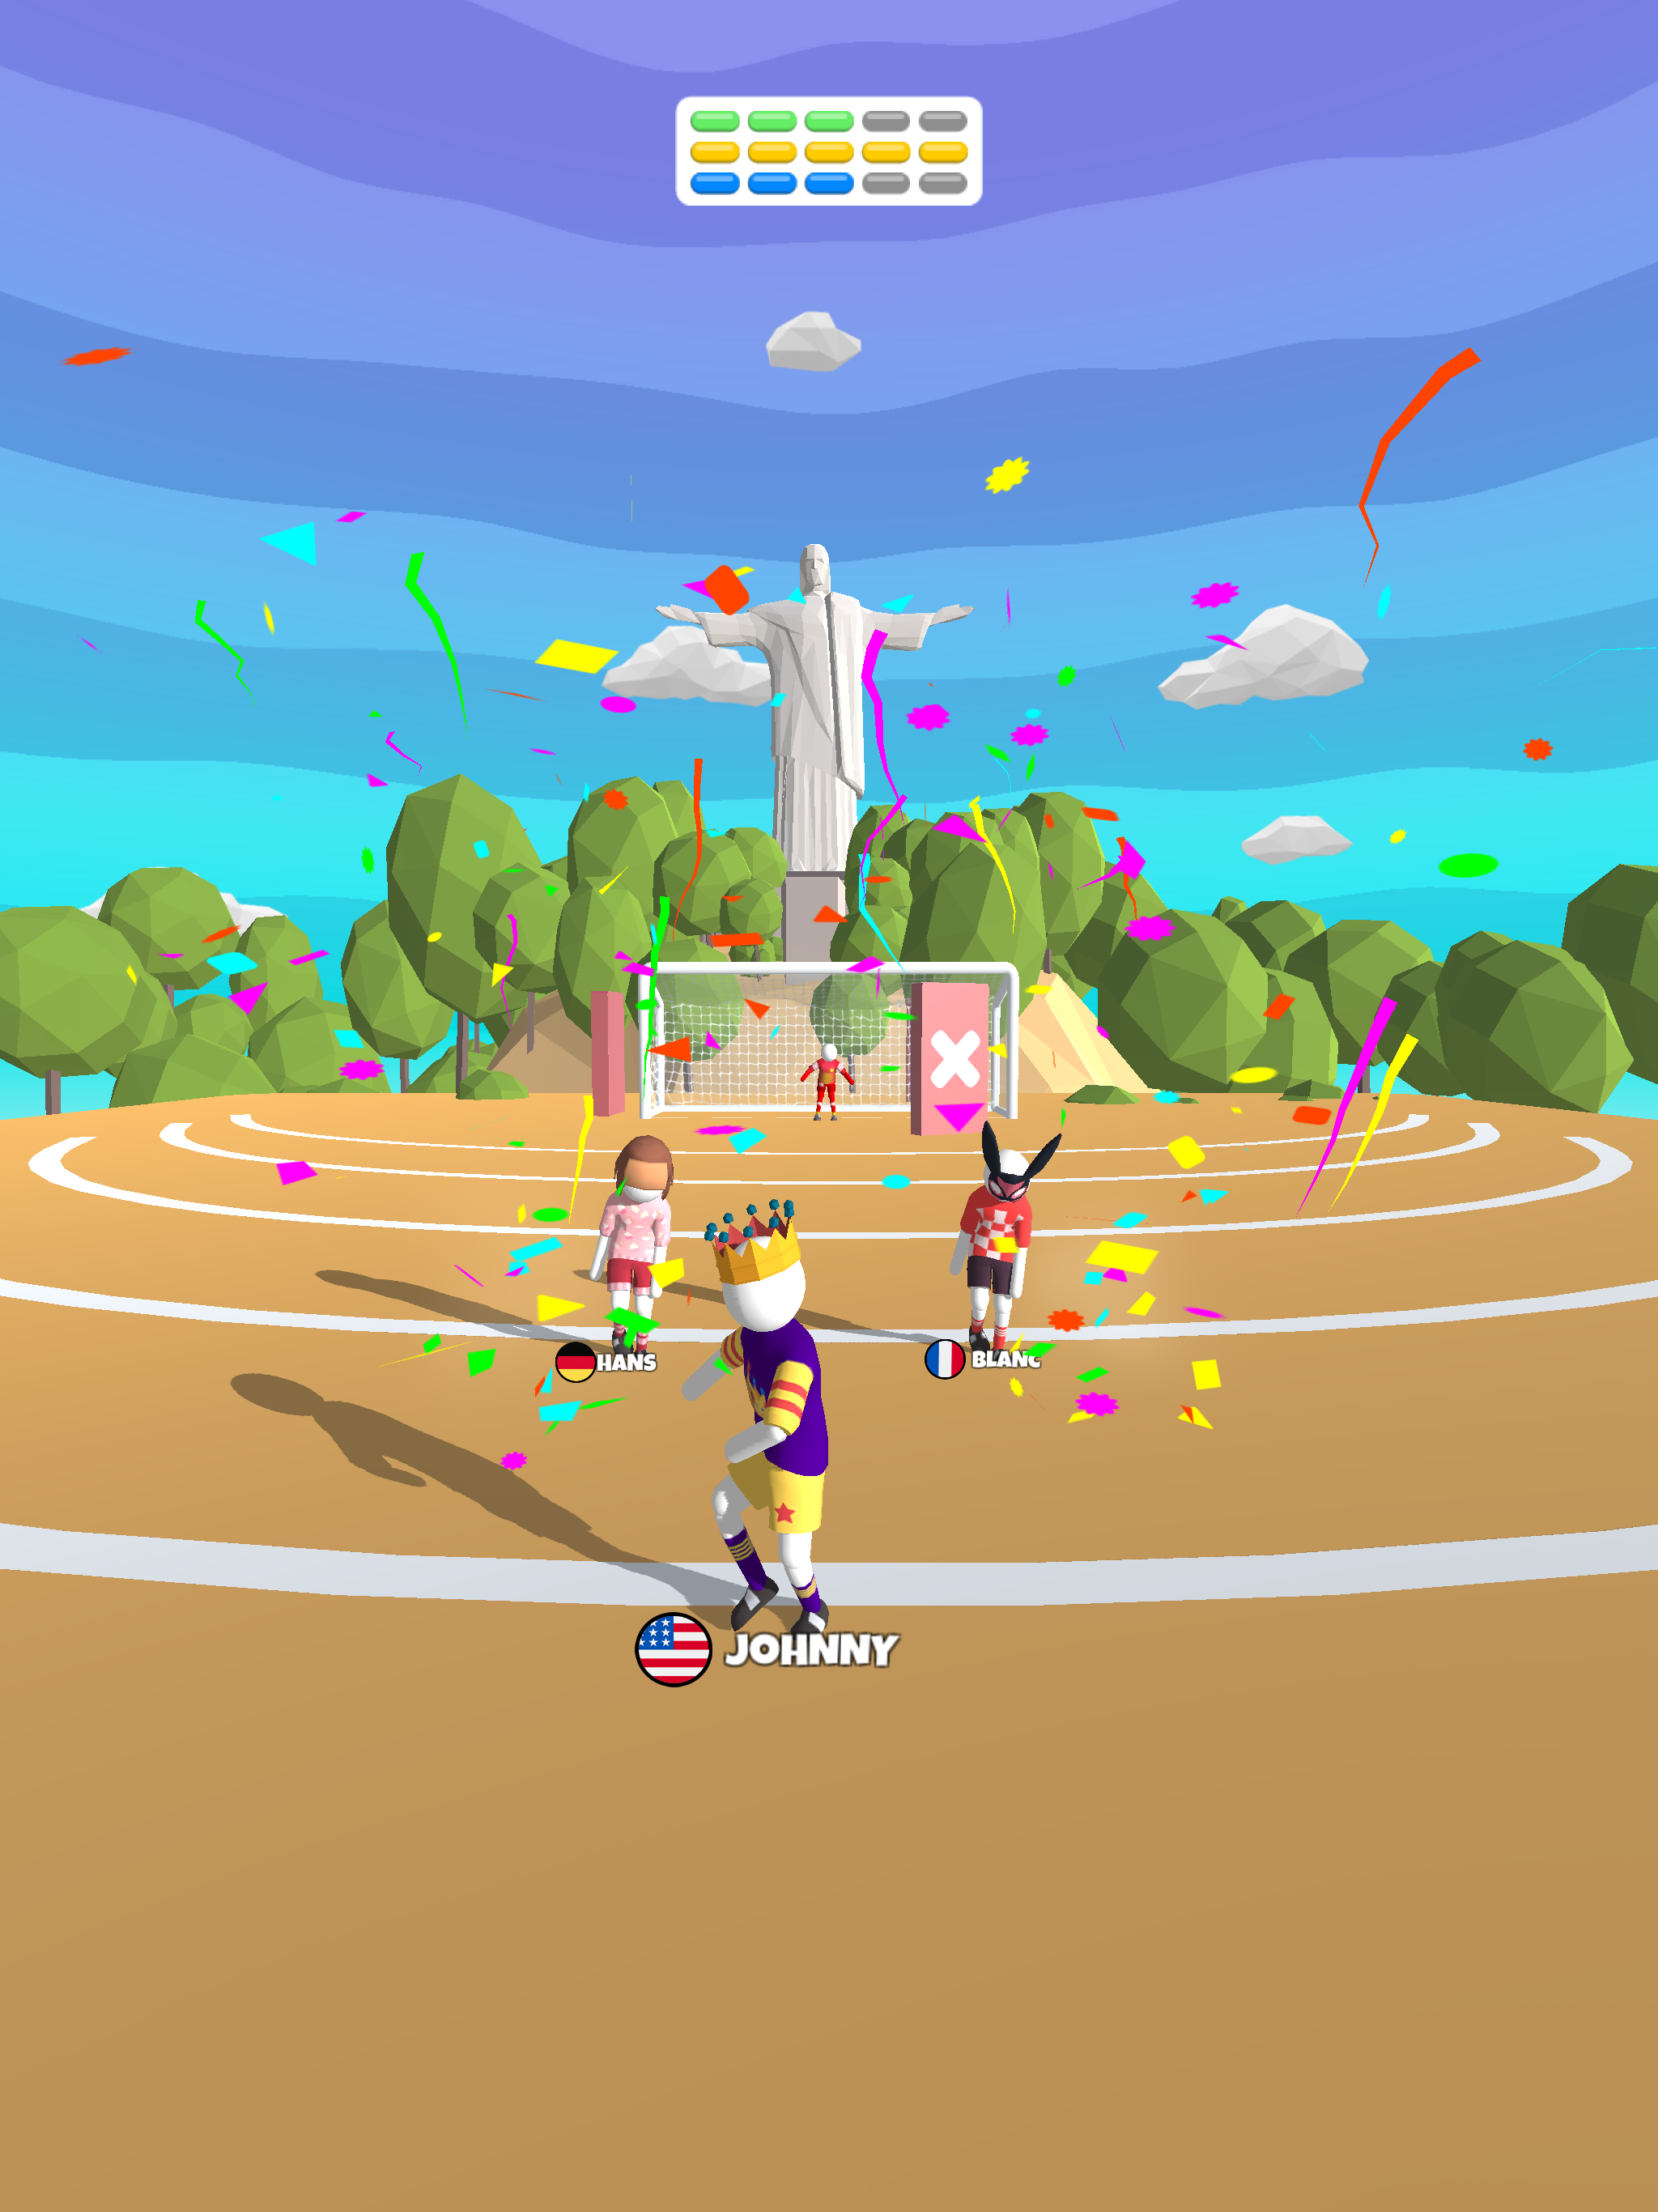 Play Goal Party - Fun Soccer Cup Online